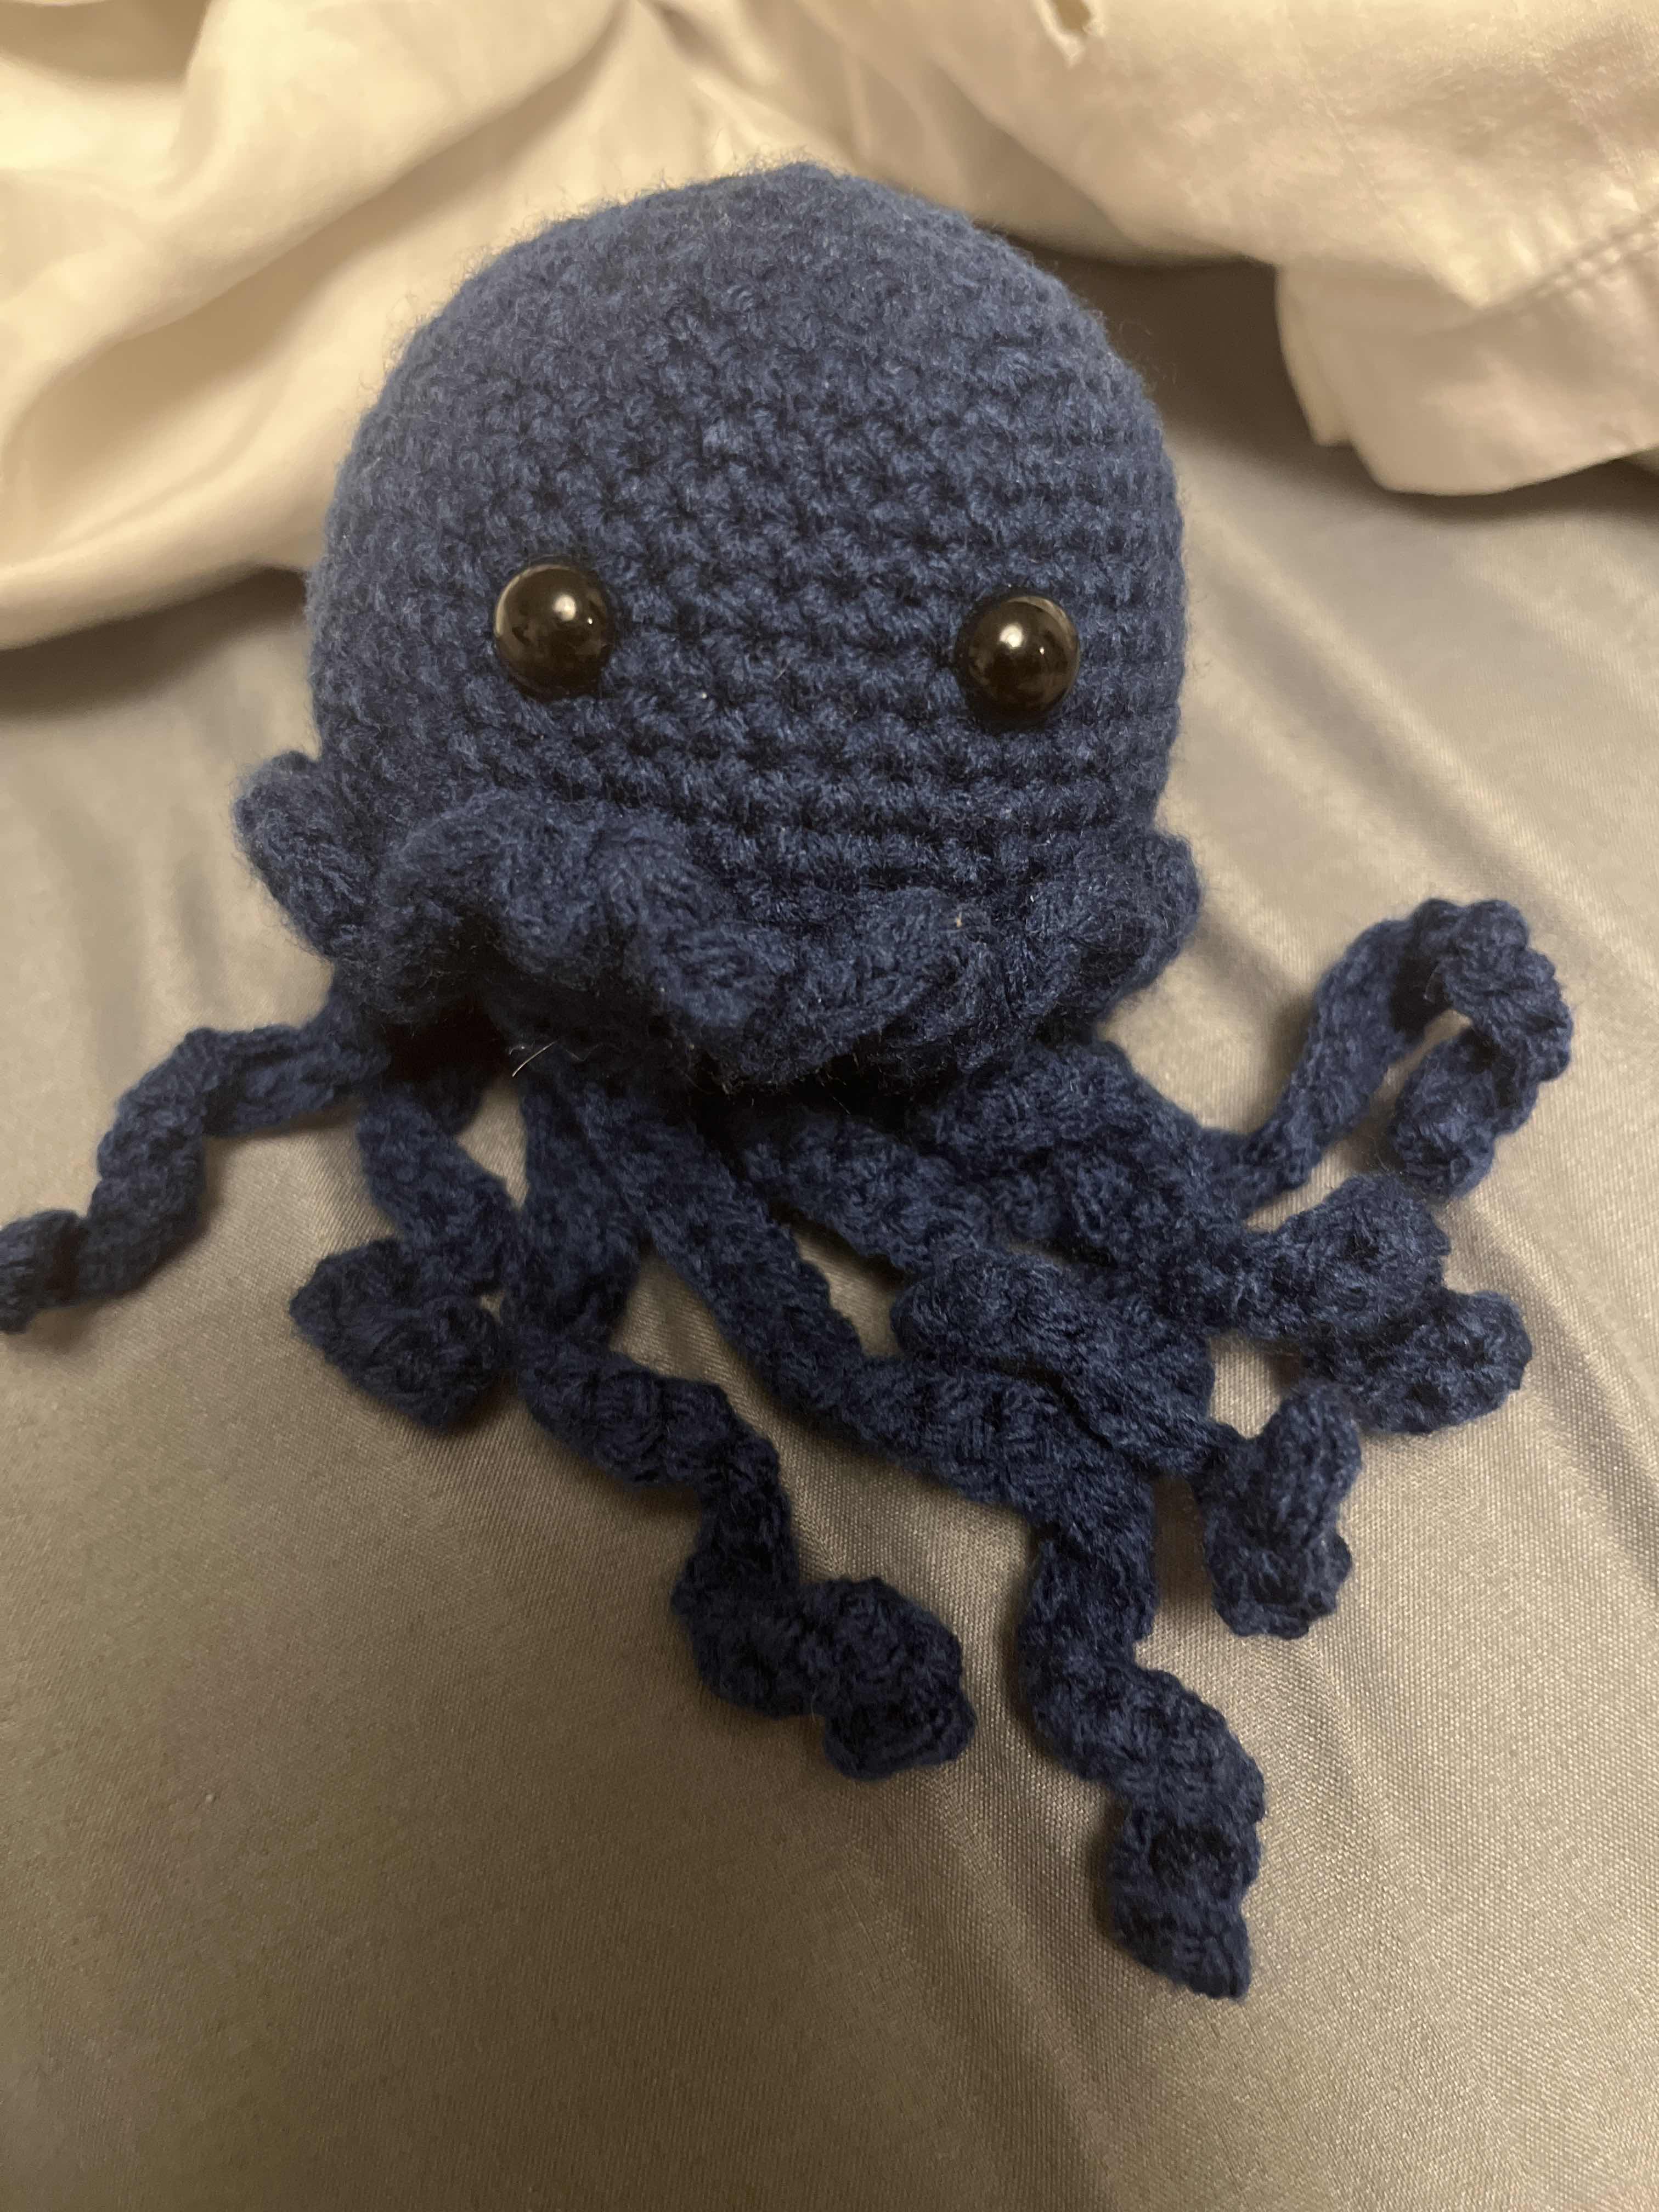 A picture of a crocheted blue jellyfish with black eyes.